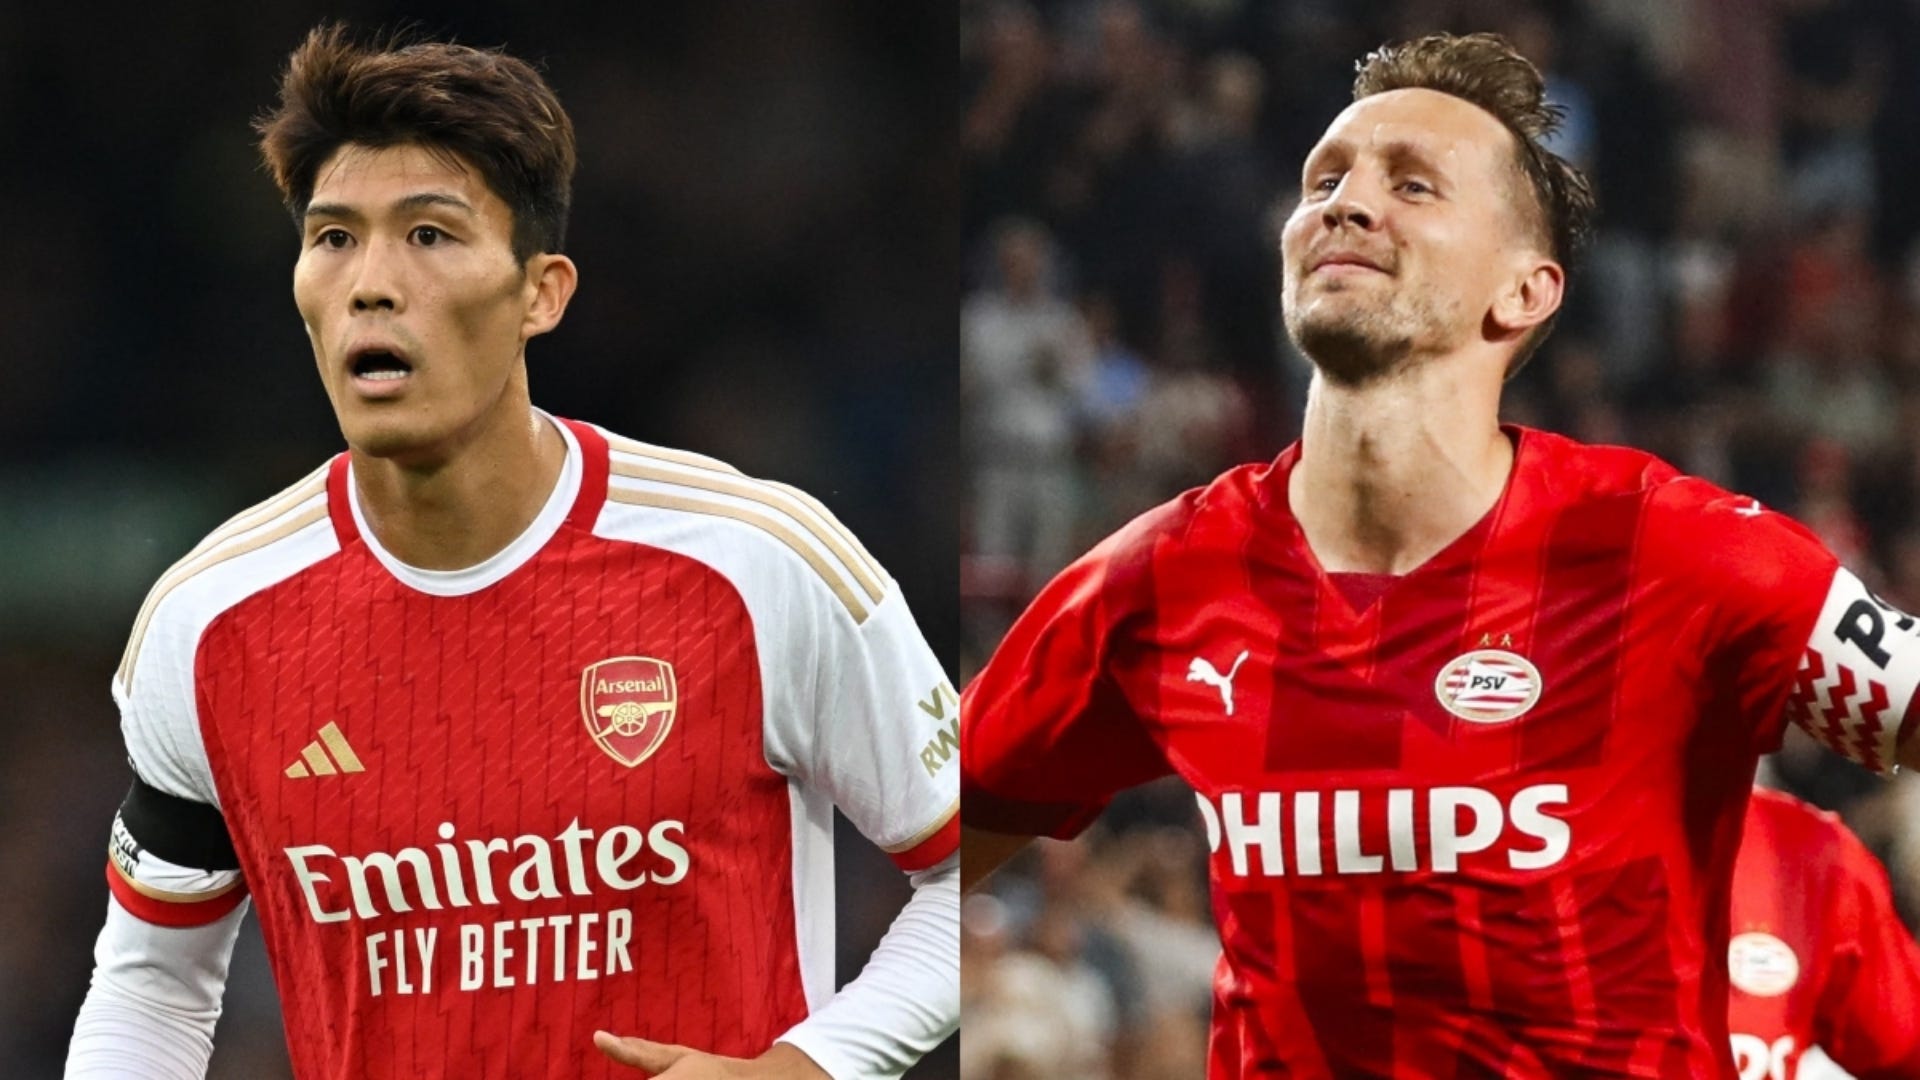 Arsenal vs PSV Live stream, TV channel, kick-off time and where to watch Goal US